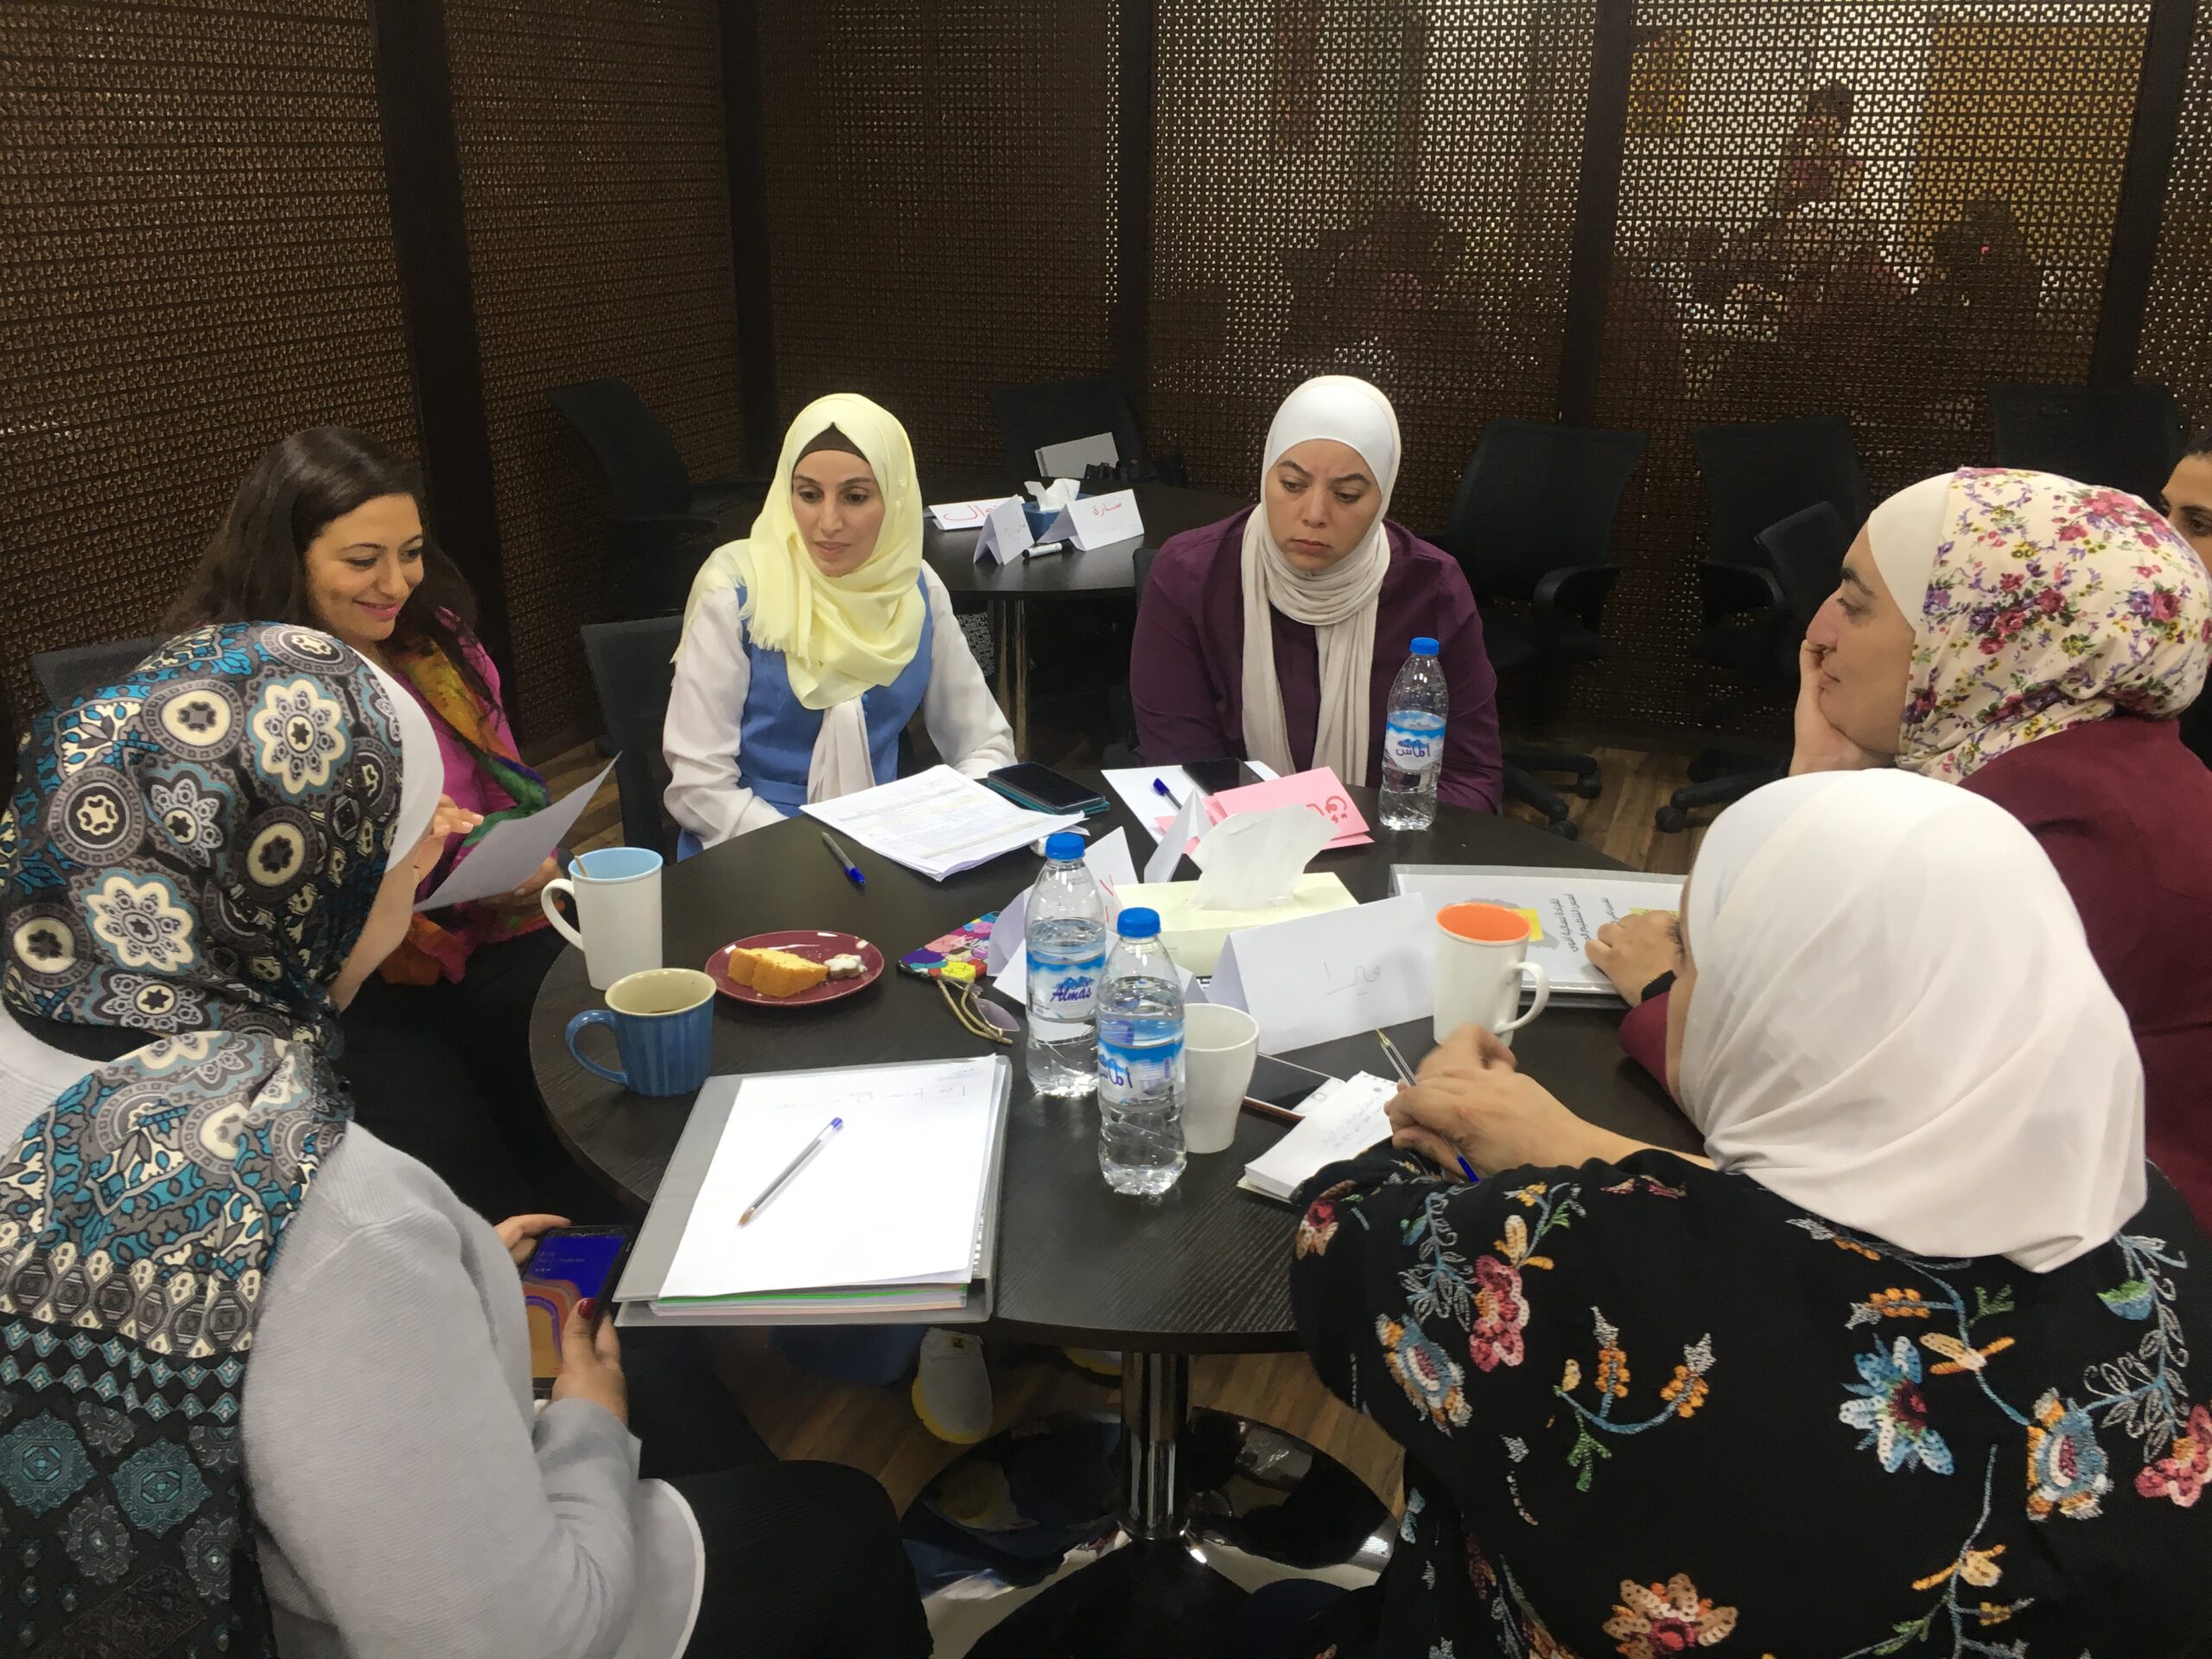 ‘Principles of Community Organizing for Stronger Women Leaderships’ course launched by Hivos